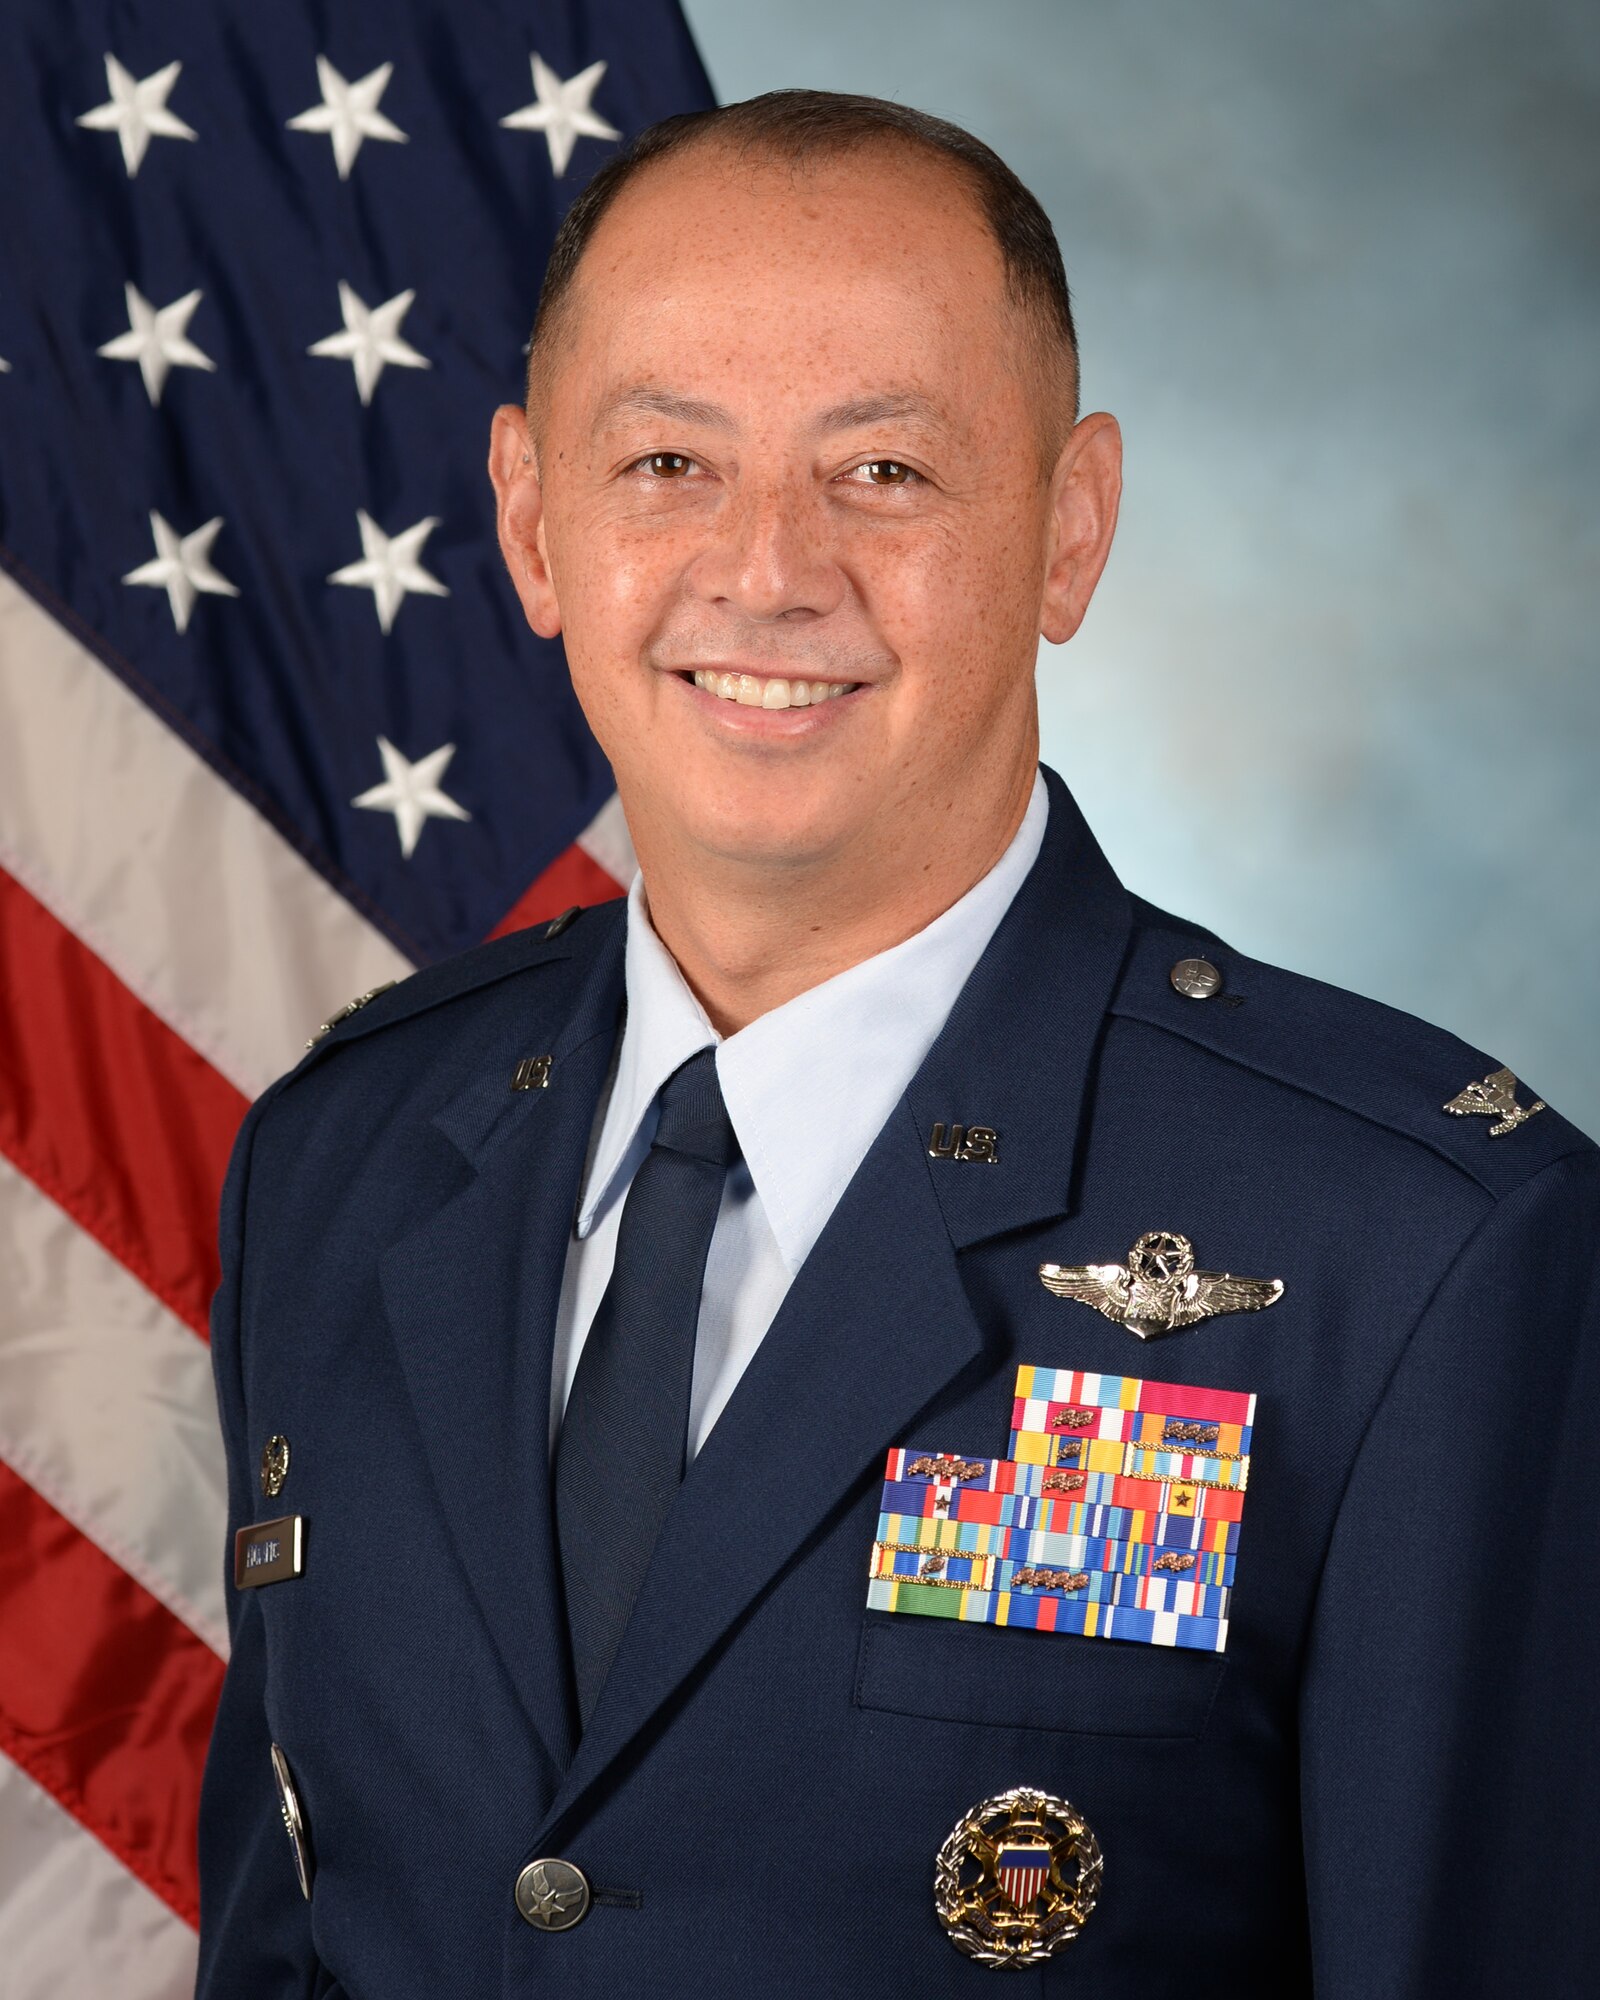 The official photo of Col. John Edwards.